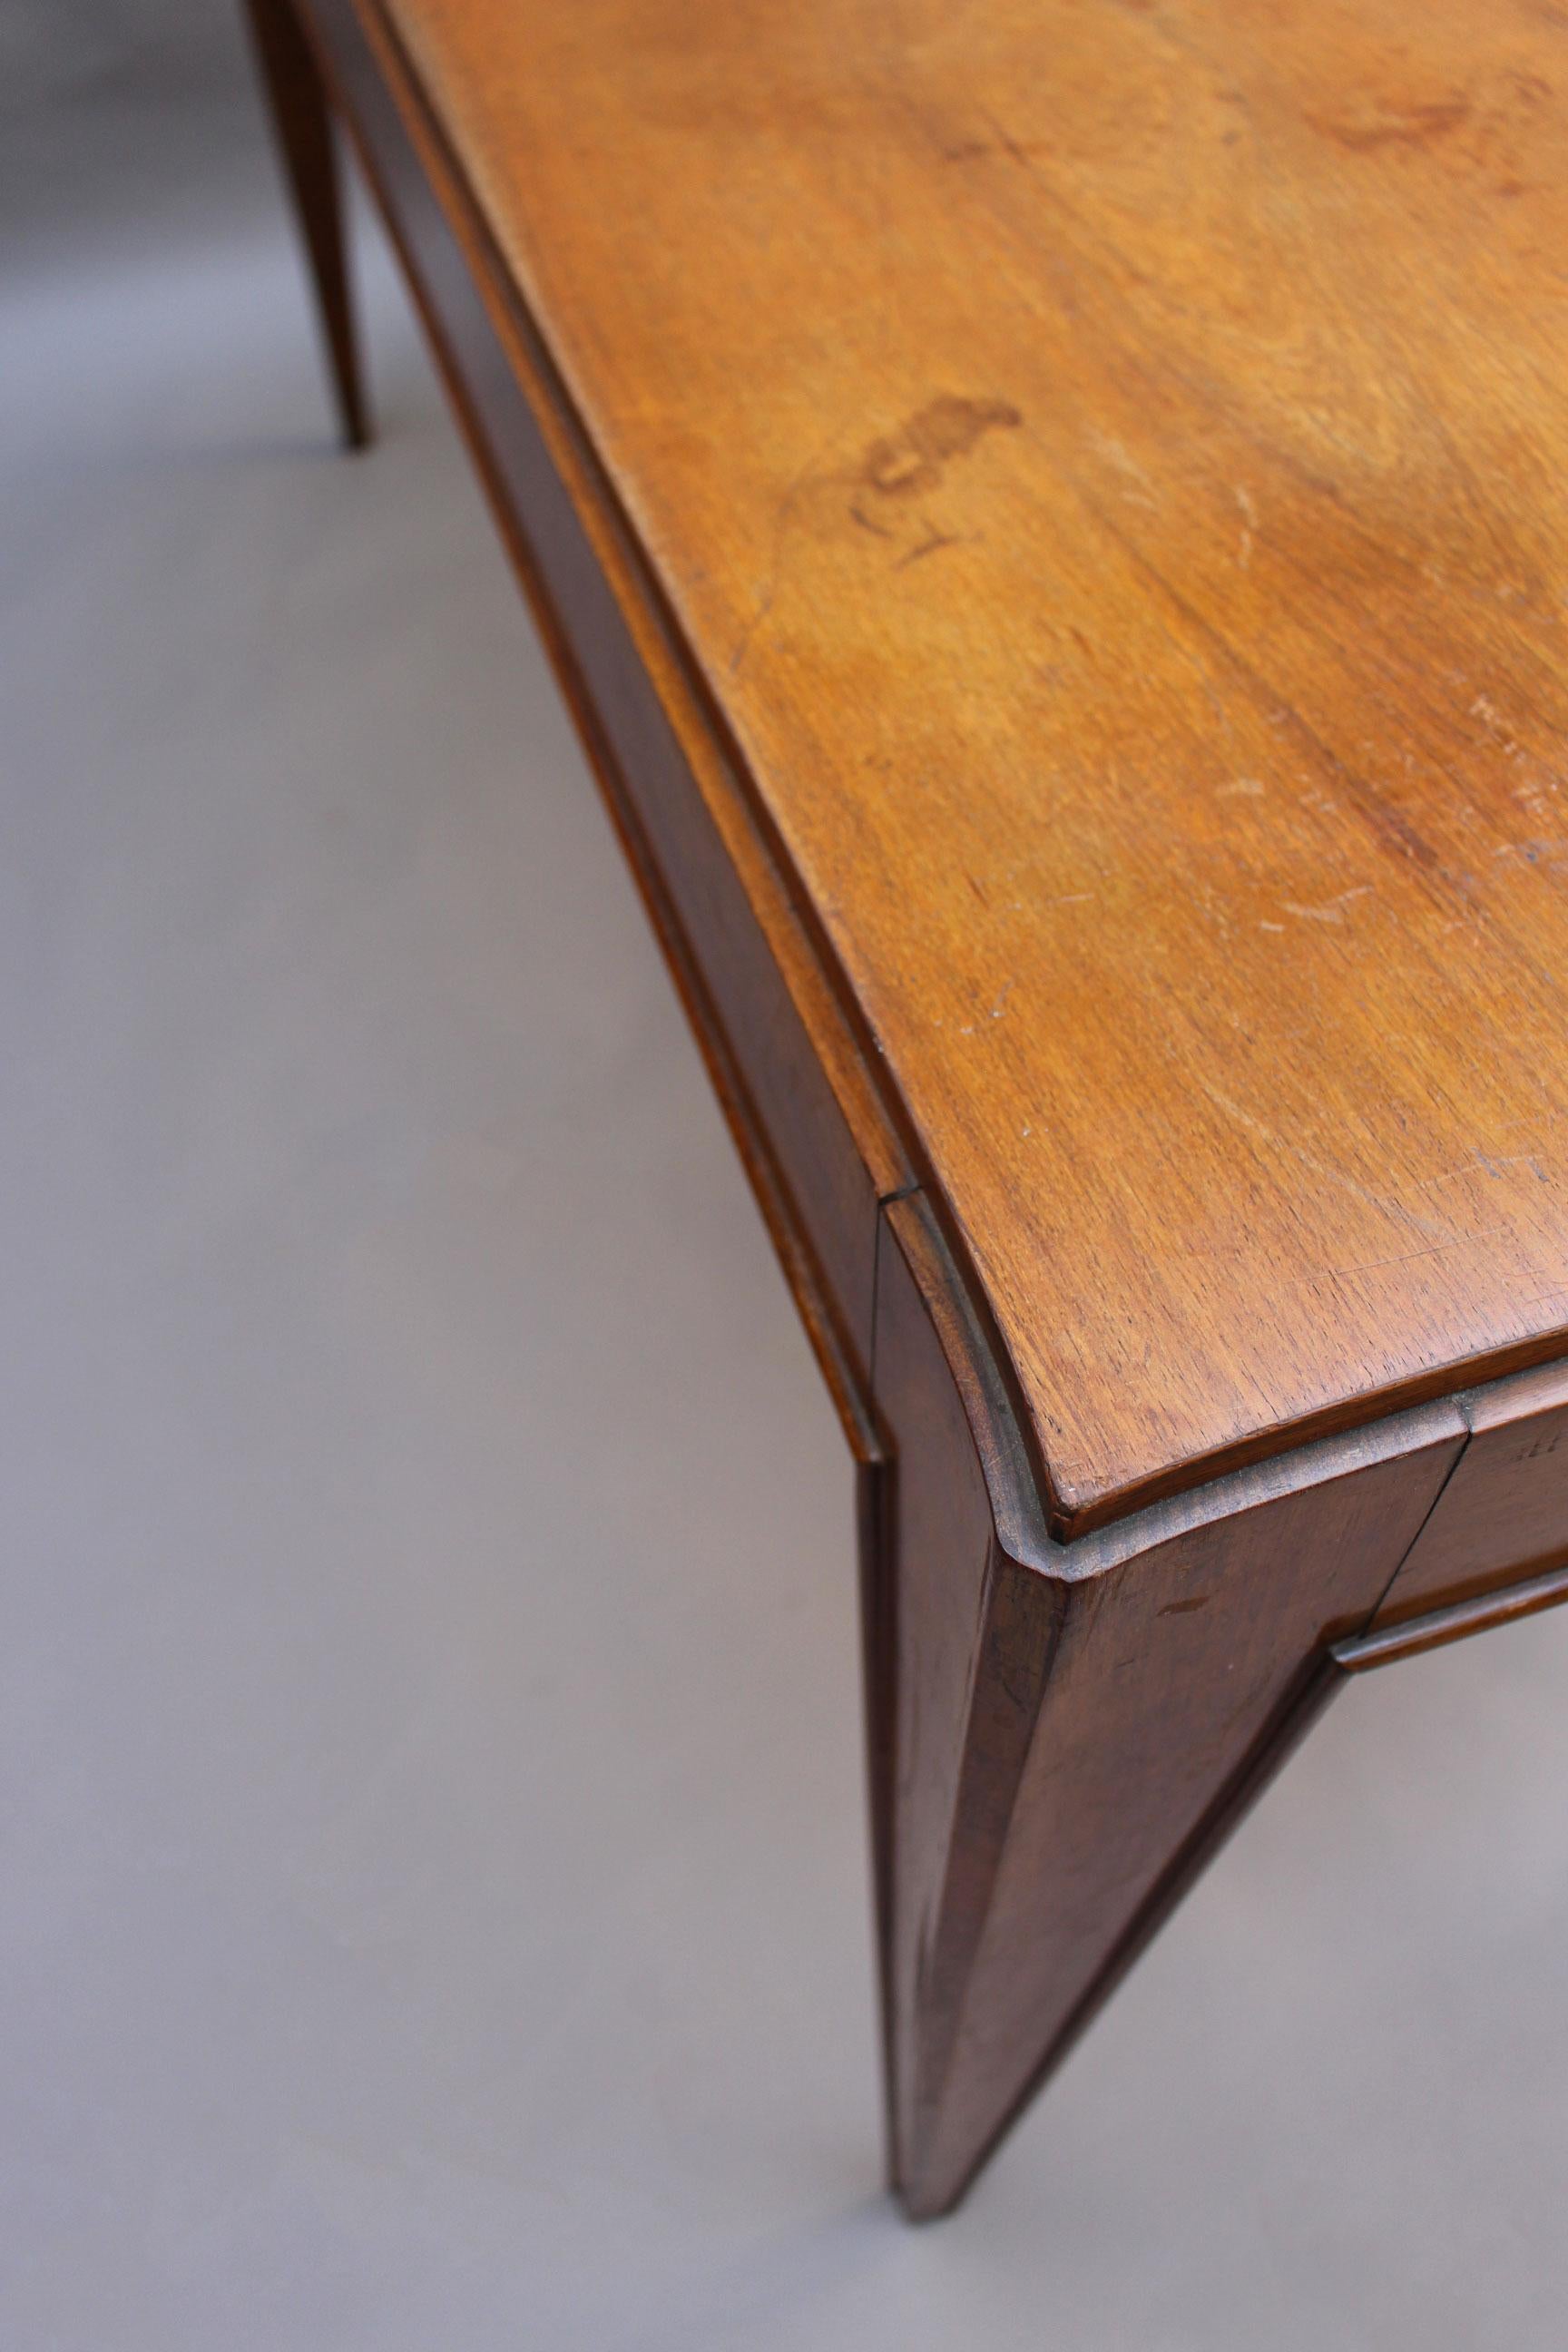 Fine French Art Deco Palisander Dining/Writing Table Attributed to Dominique For Sale 10